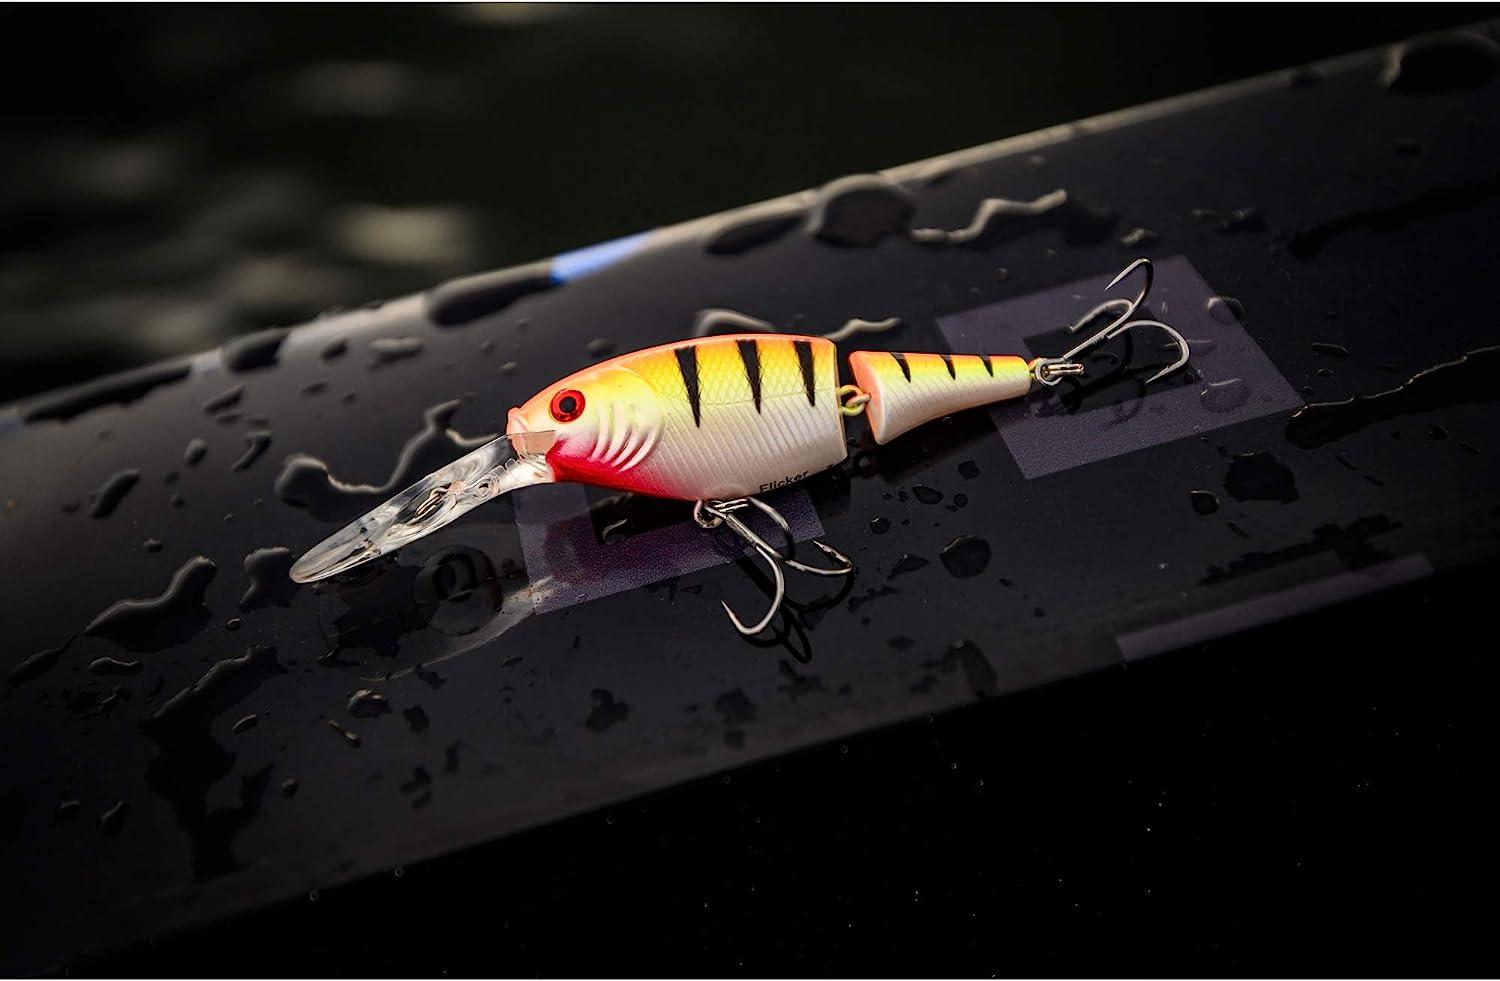 Berkley Flicker Shad Jointed Fishing Hard Bait 2 3/4in - 1/3 oz Firetail  Red Tail